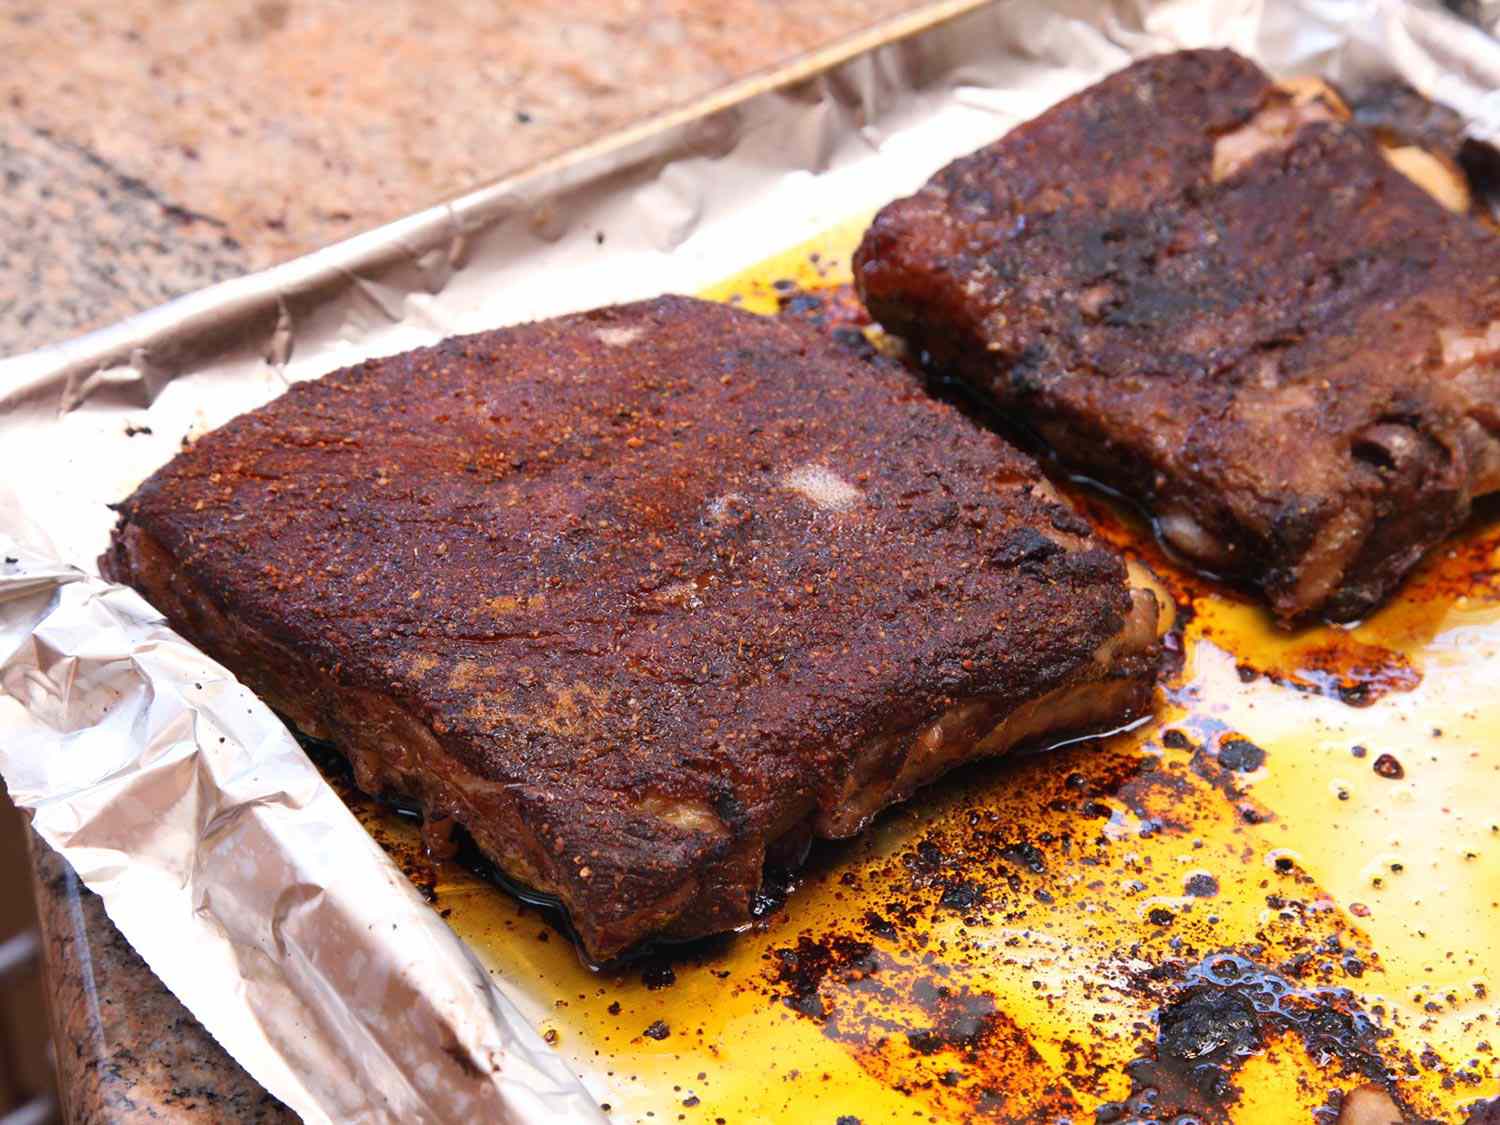 Sous vide pork ribs browned in the oven